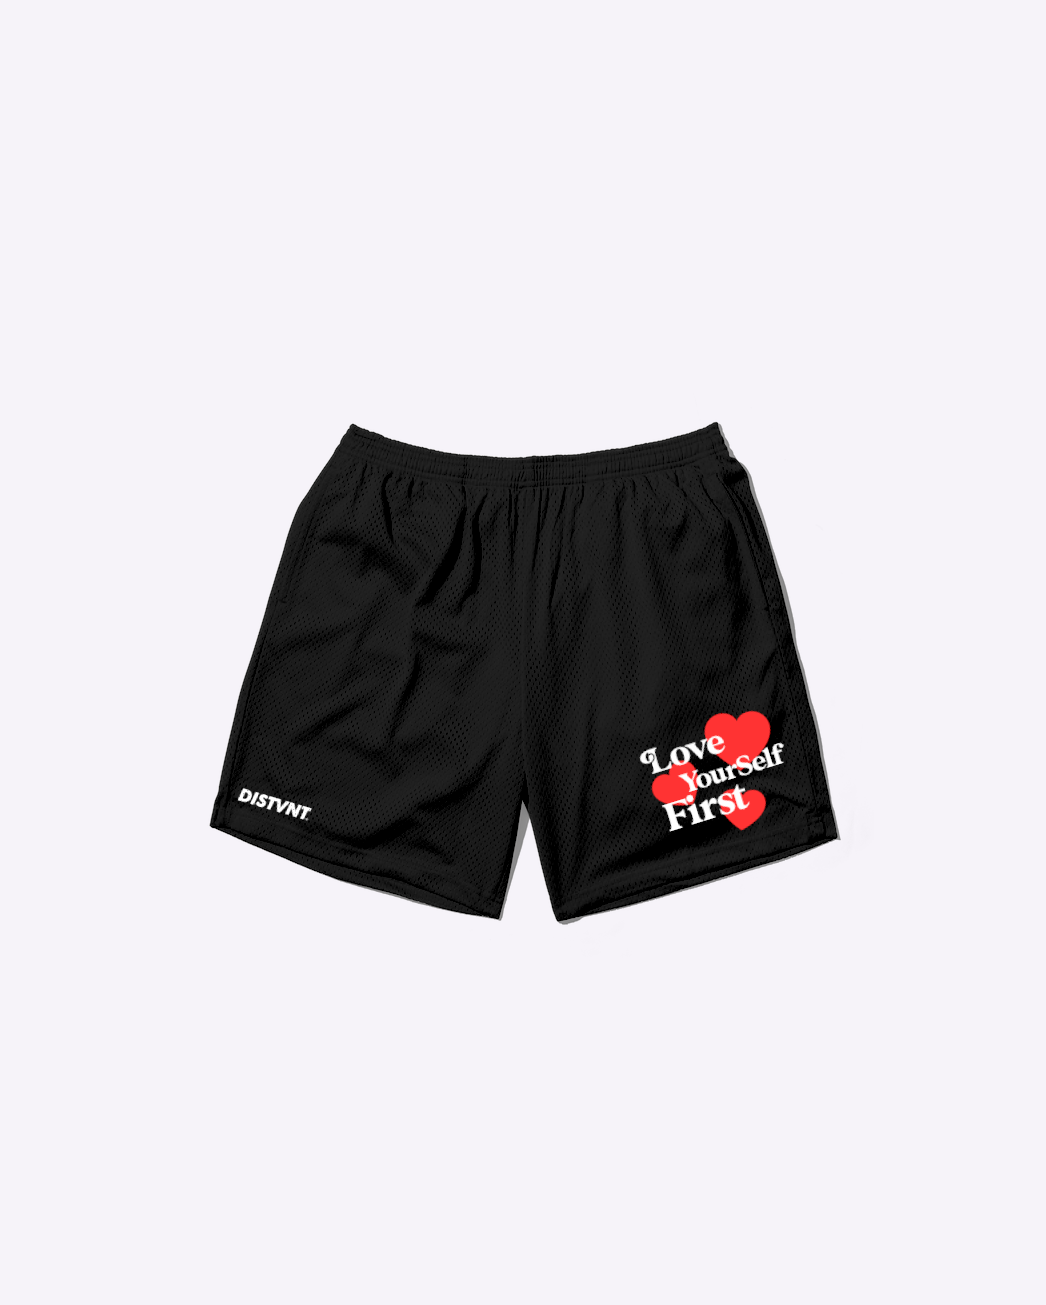 Love Yourself First Mesh Shorts